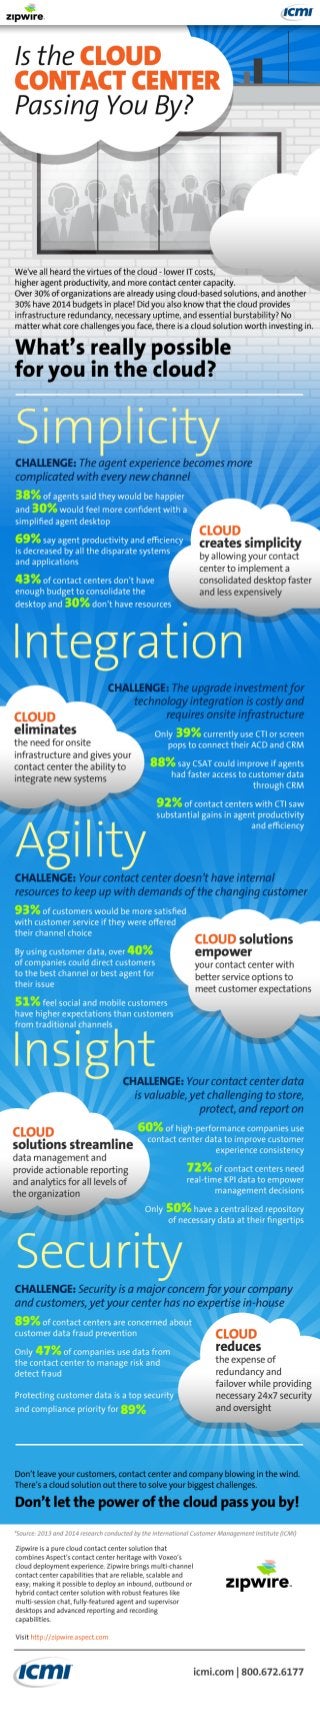 Top Contact Center Challenges met by Simple Cloud Based Solutions